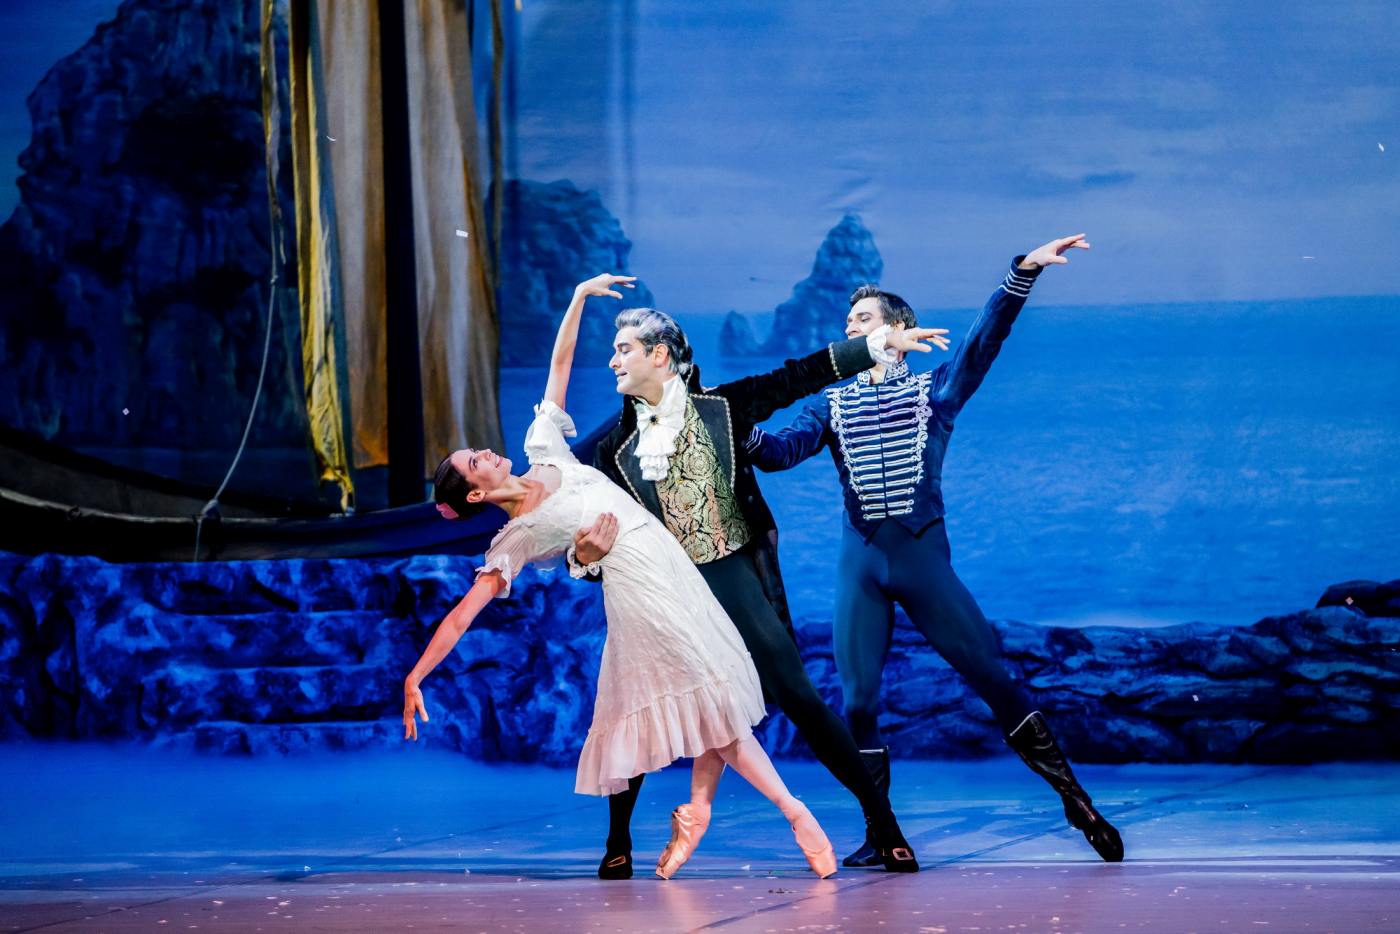 13. M.Yakovleva (Marie), A.Komarov (Drosselmeier), and D.Tomofeev (Prince), “The Nutcracker” by W.Eagling and T.Solymosi, Hungarian National Ballet & Hungarian National Ballet Institute 2022 © V.Berecz